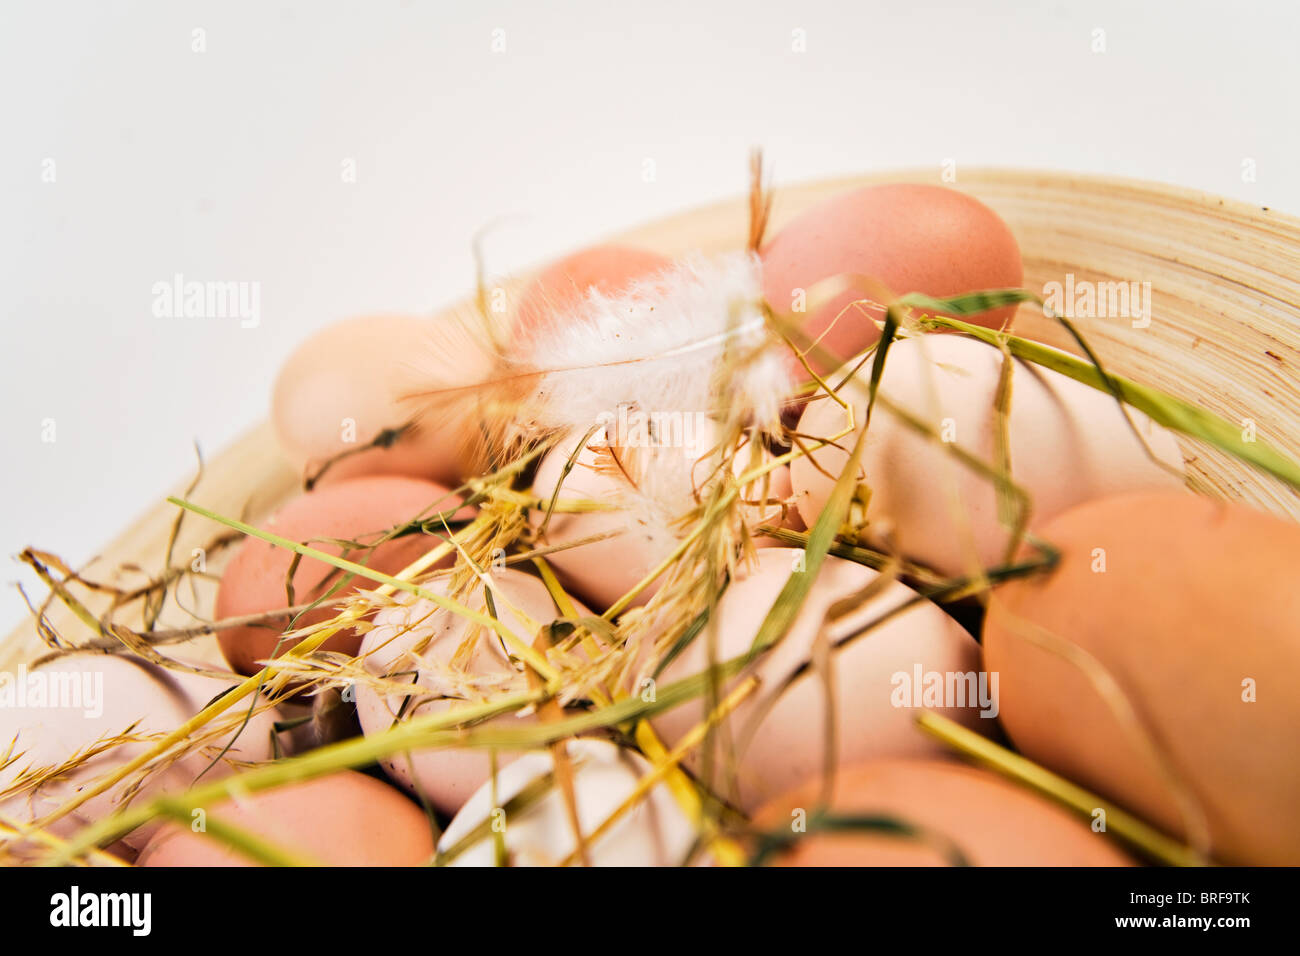 Eggs on a plate with feathers and straw Stock Photo